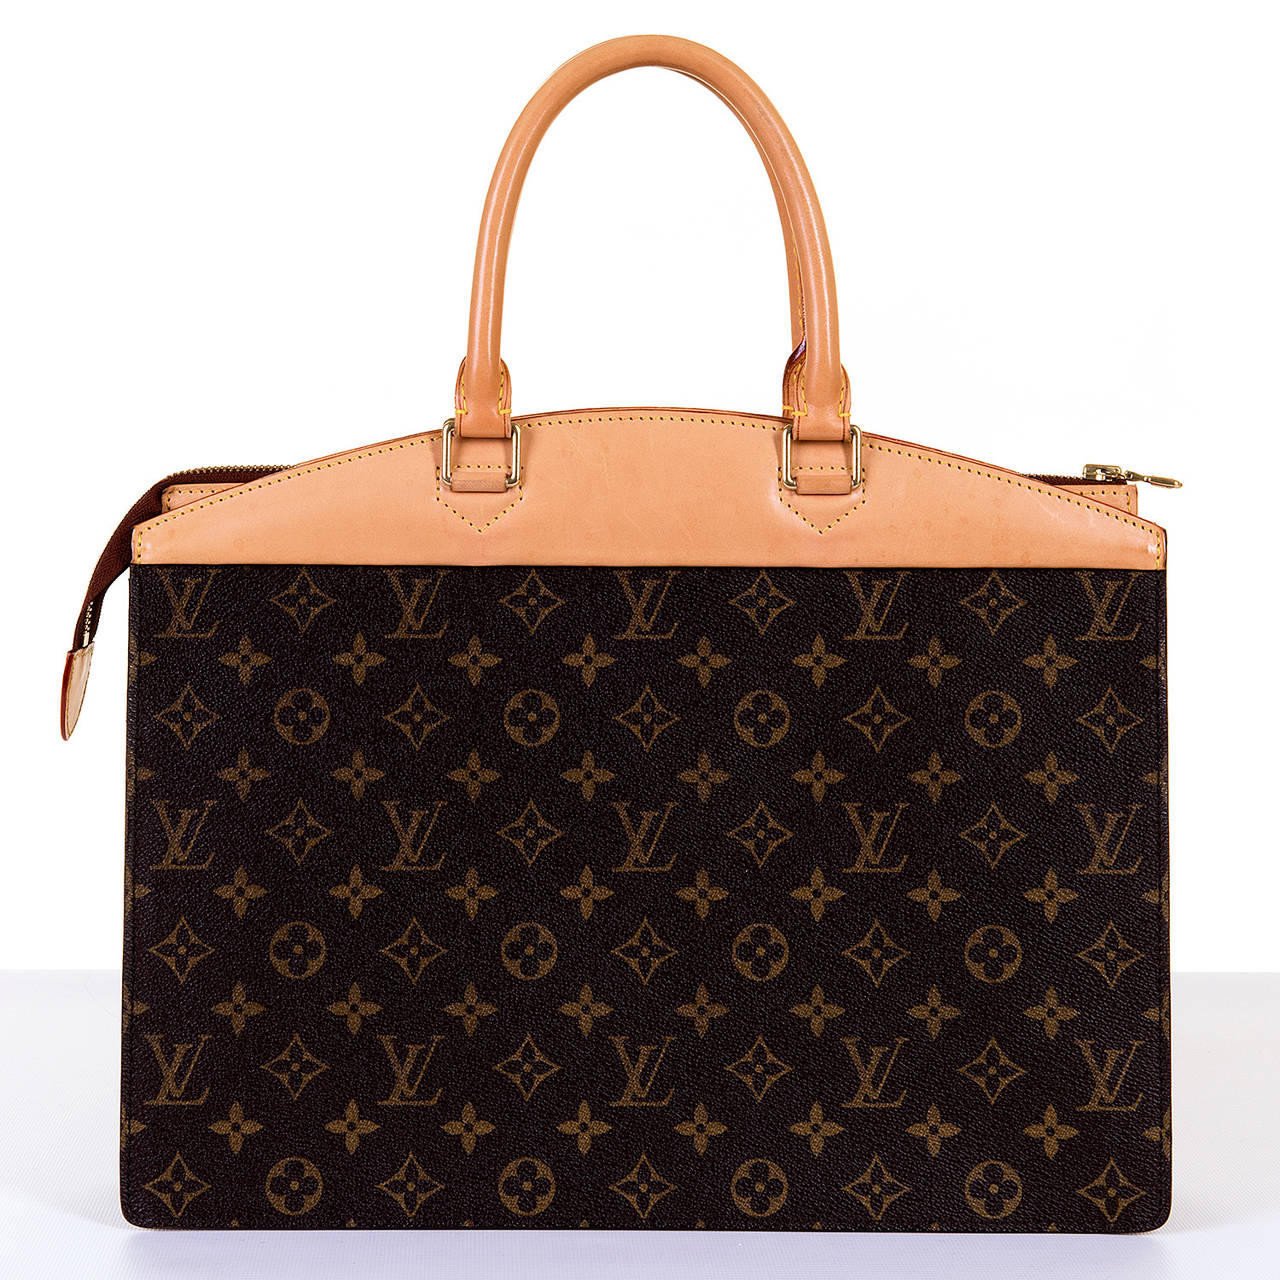 This exquisite Louis Vuitton 'Sac Riviera' bag was a special order bag, with personalised detail, such as the washable fitted beige toile interior and the exterior full-width pocket. The beautiful natural box leather trim is complemented with gold